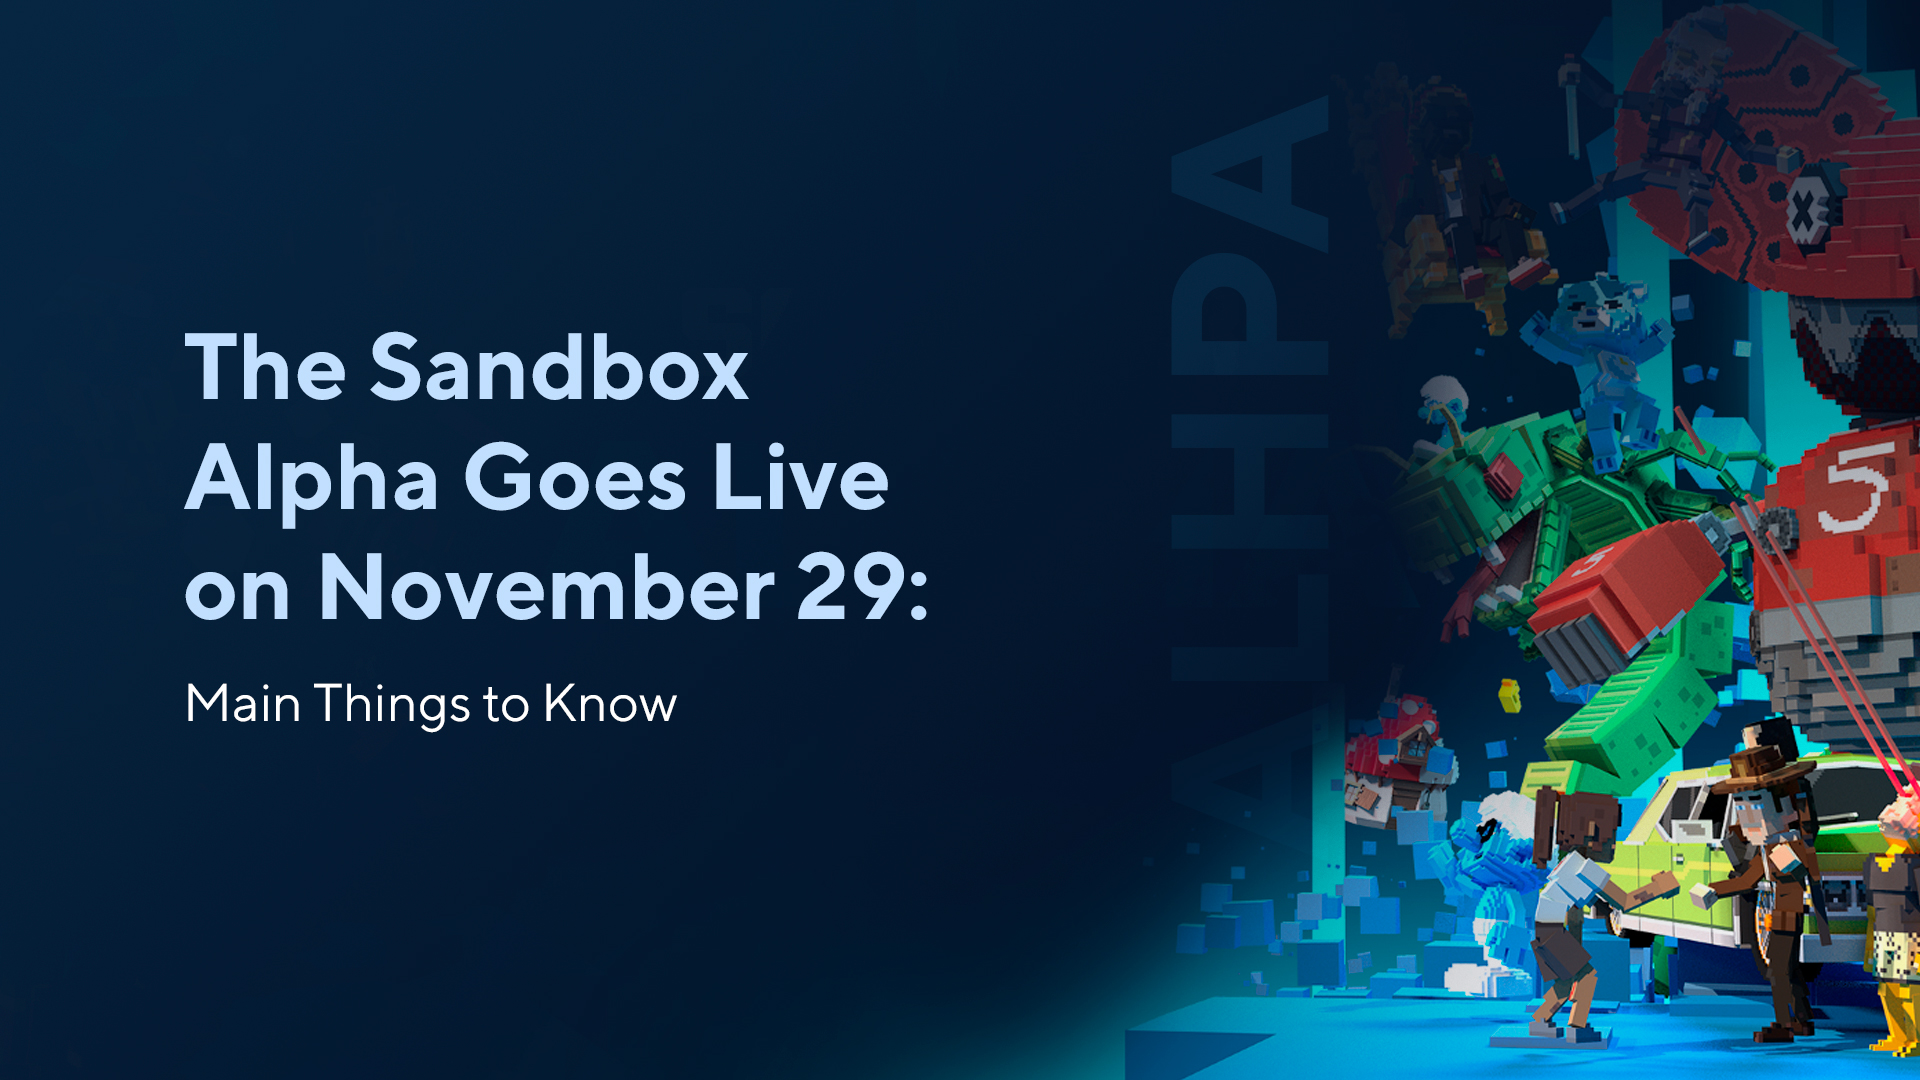 The Sandbox Alpha Goes Live on November 29: Main Things to Know